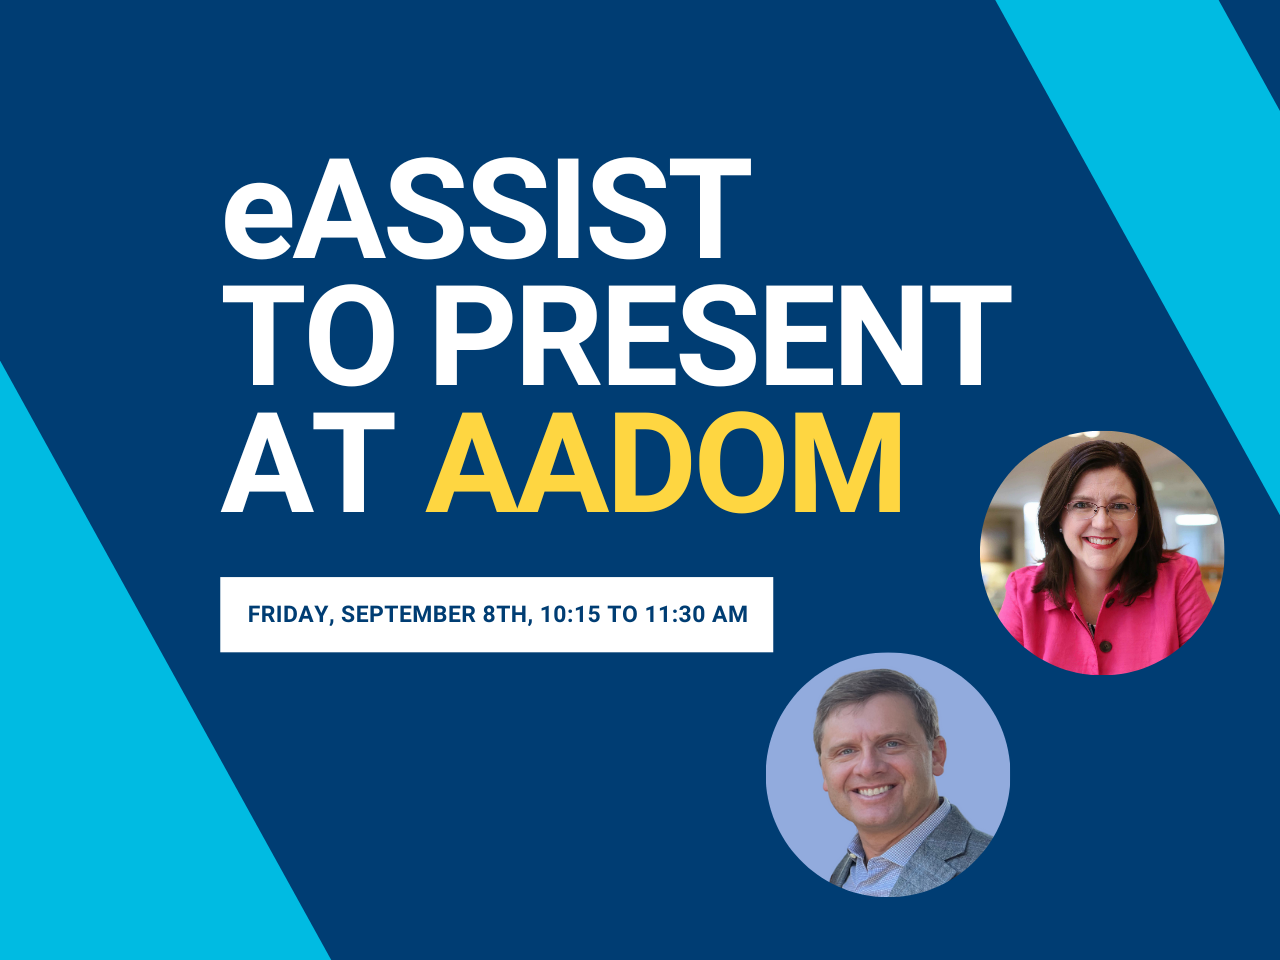 eAssist to Present at Nation’s Largest Office Manager Association Event Hosted by American Association of Dental Office Management (AADOM)